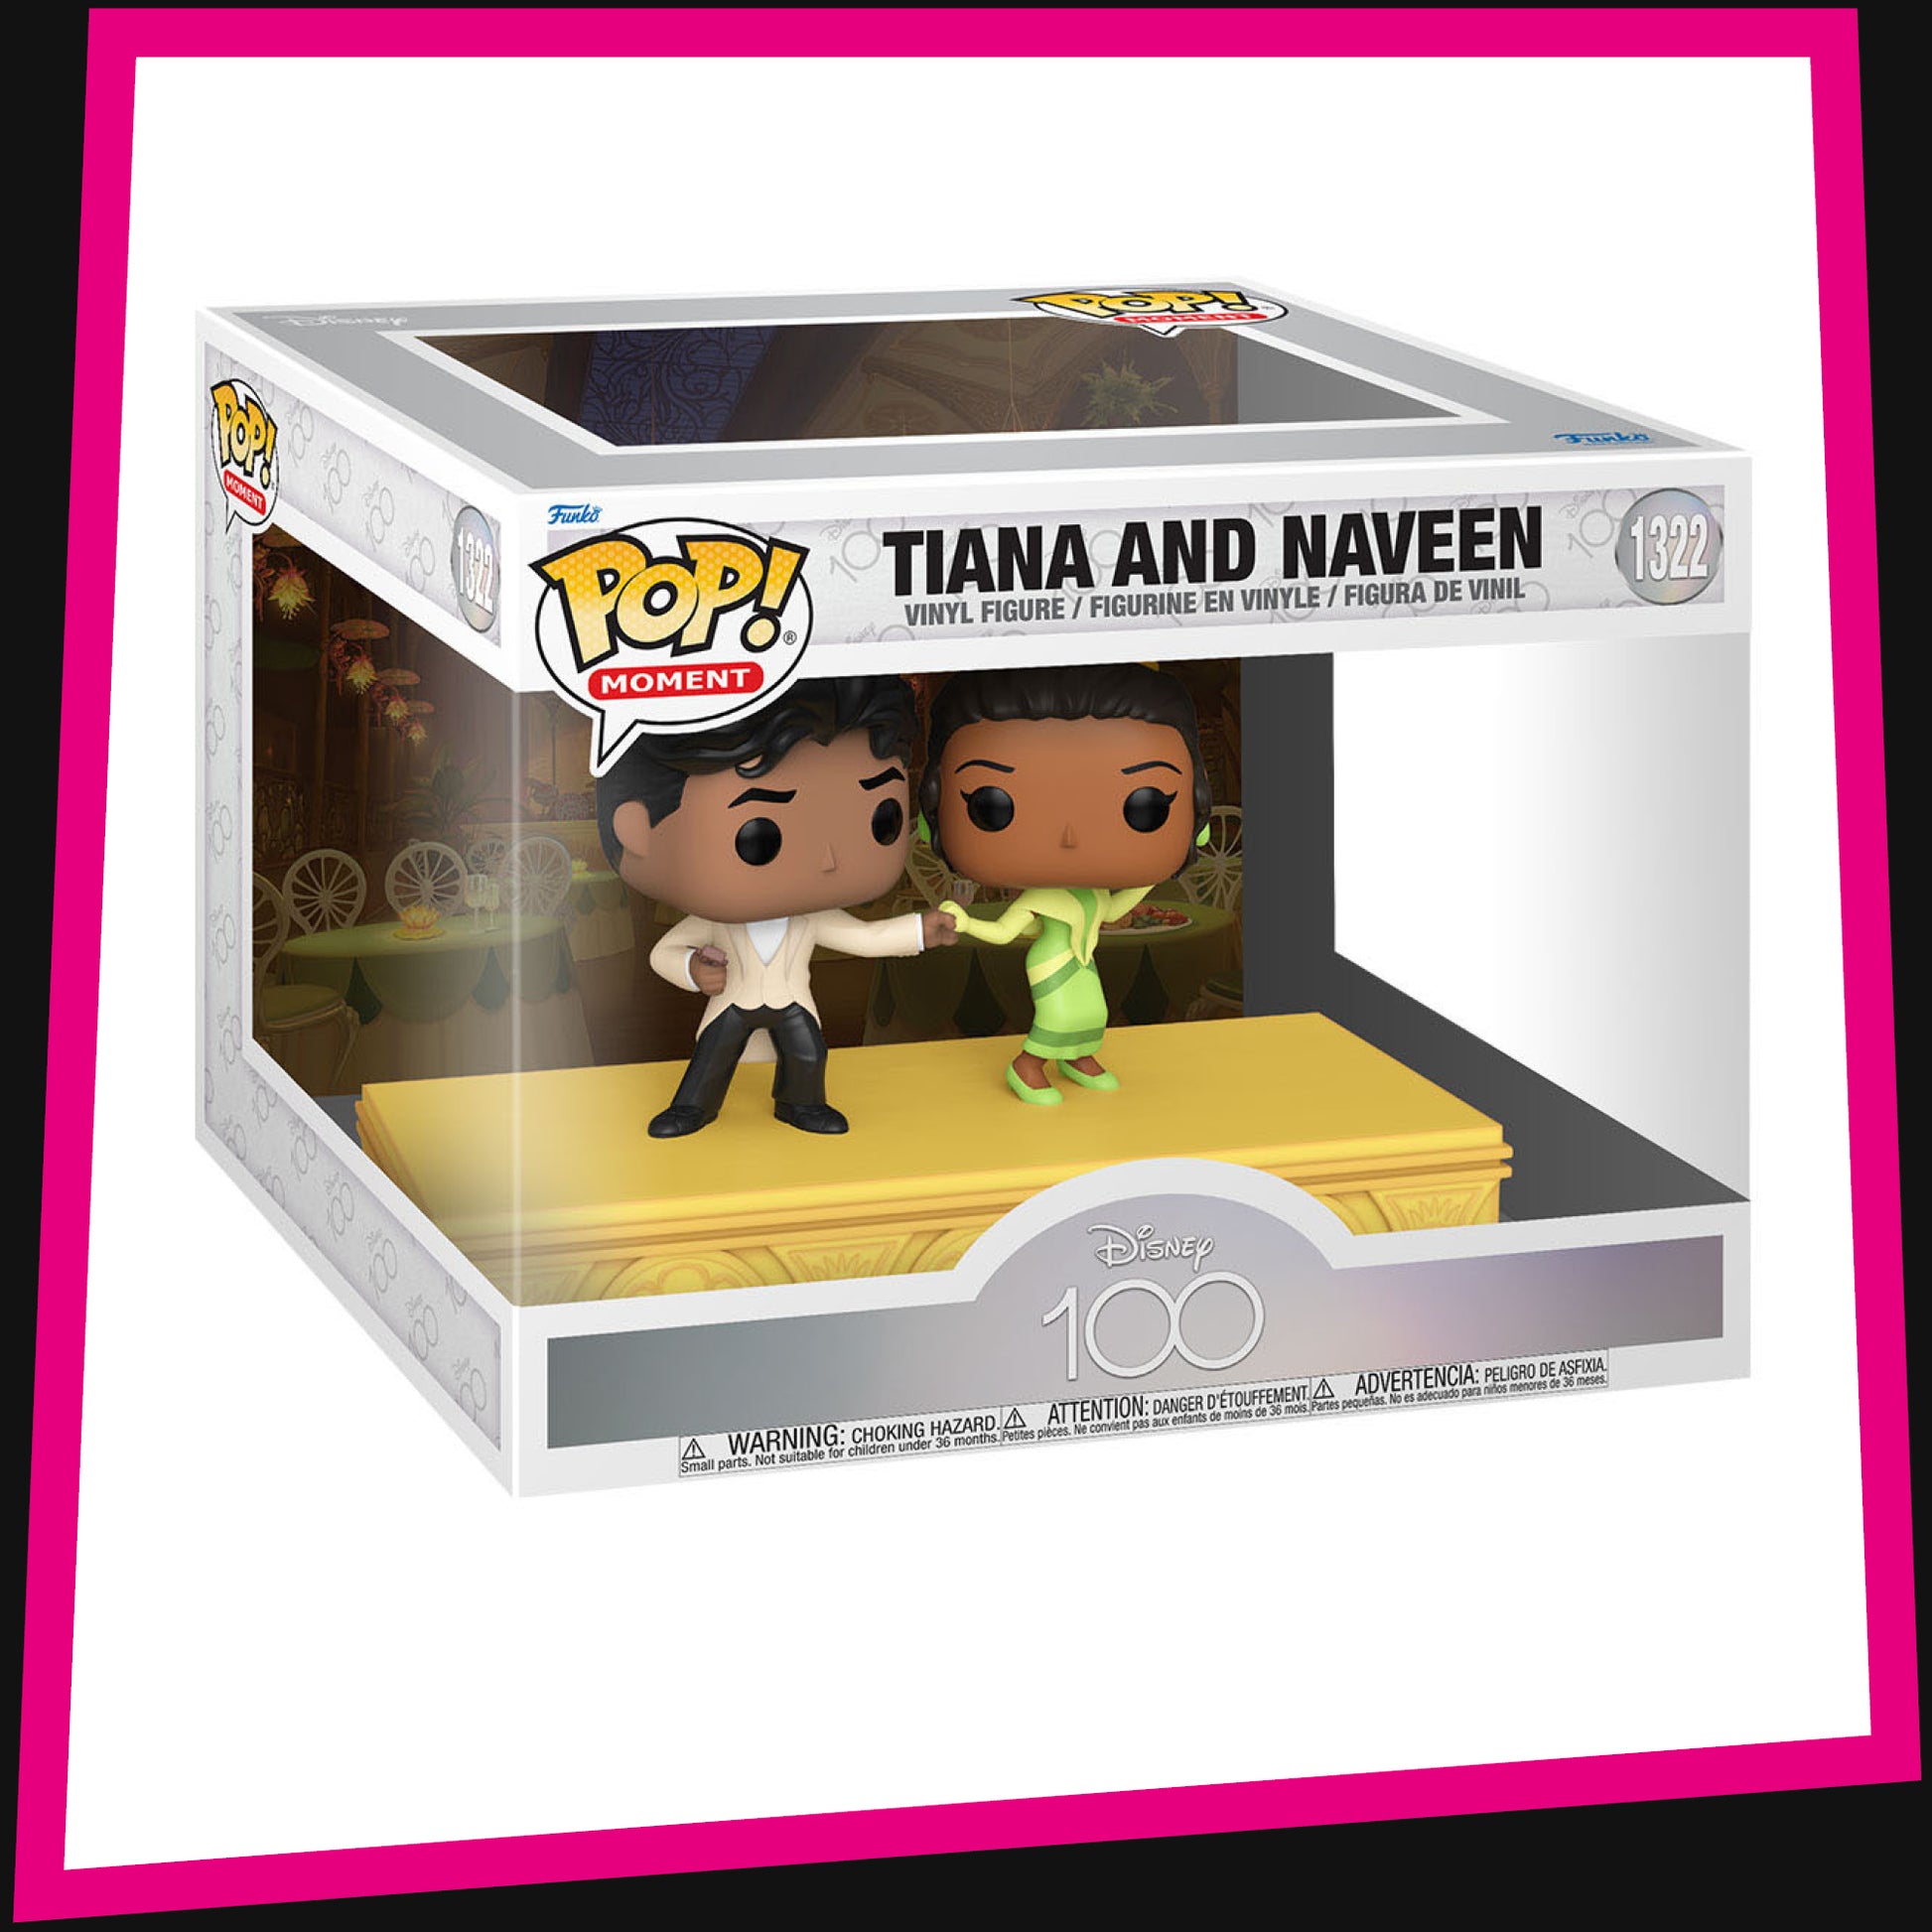 New – Naveen and #1322 - Tiana Disney Barn & Collectibles Anniversary Momen Pre-Owned 100 Funko POP! - and Toys Derek\'s Toy Vinyl